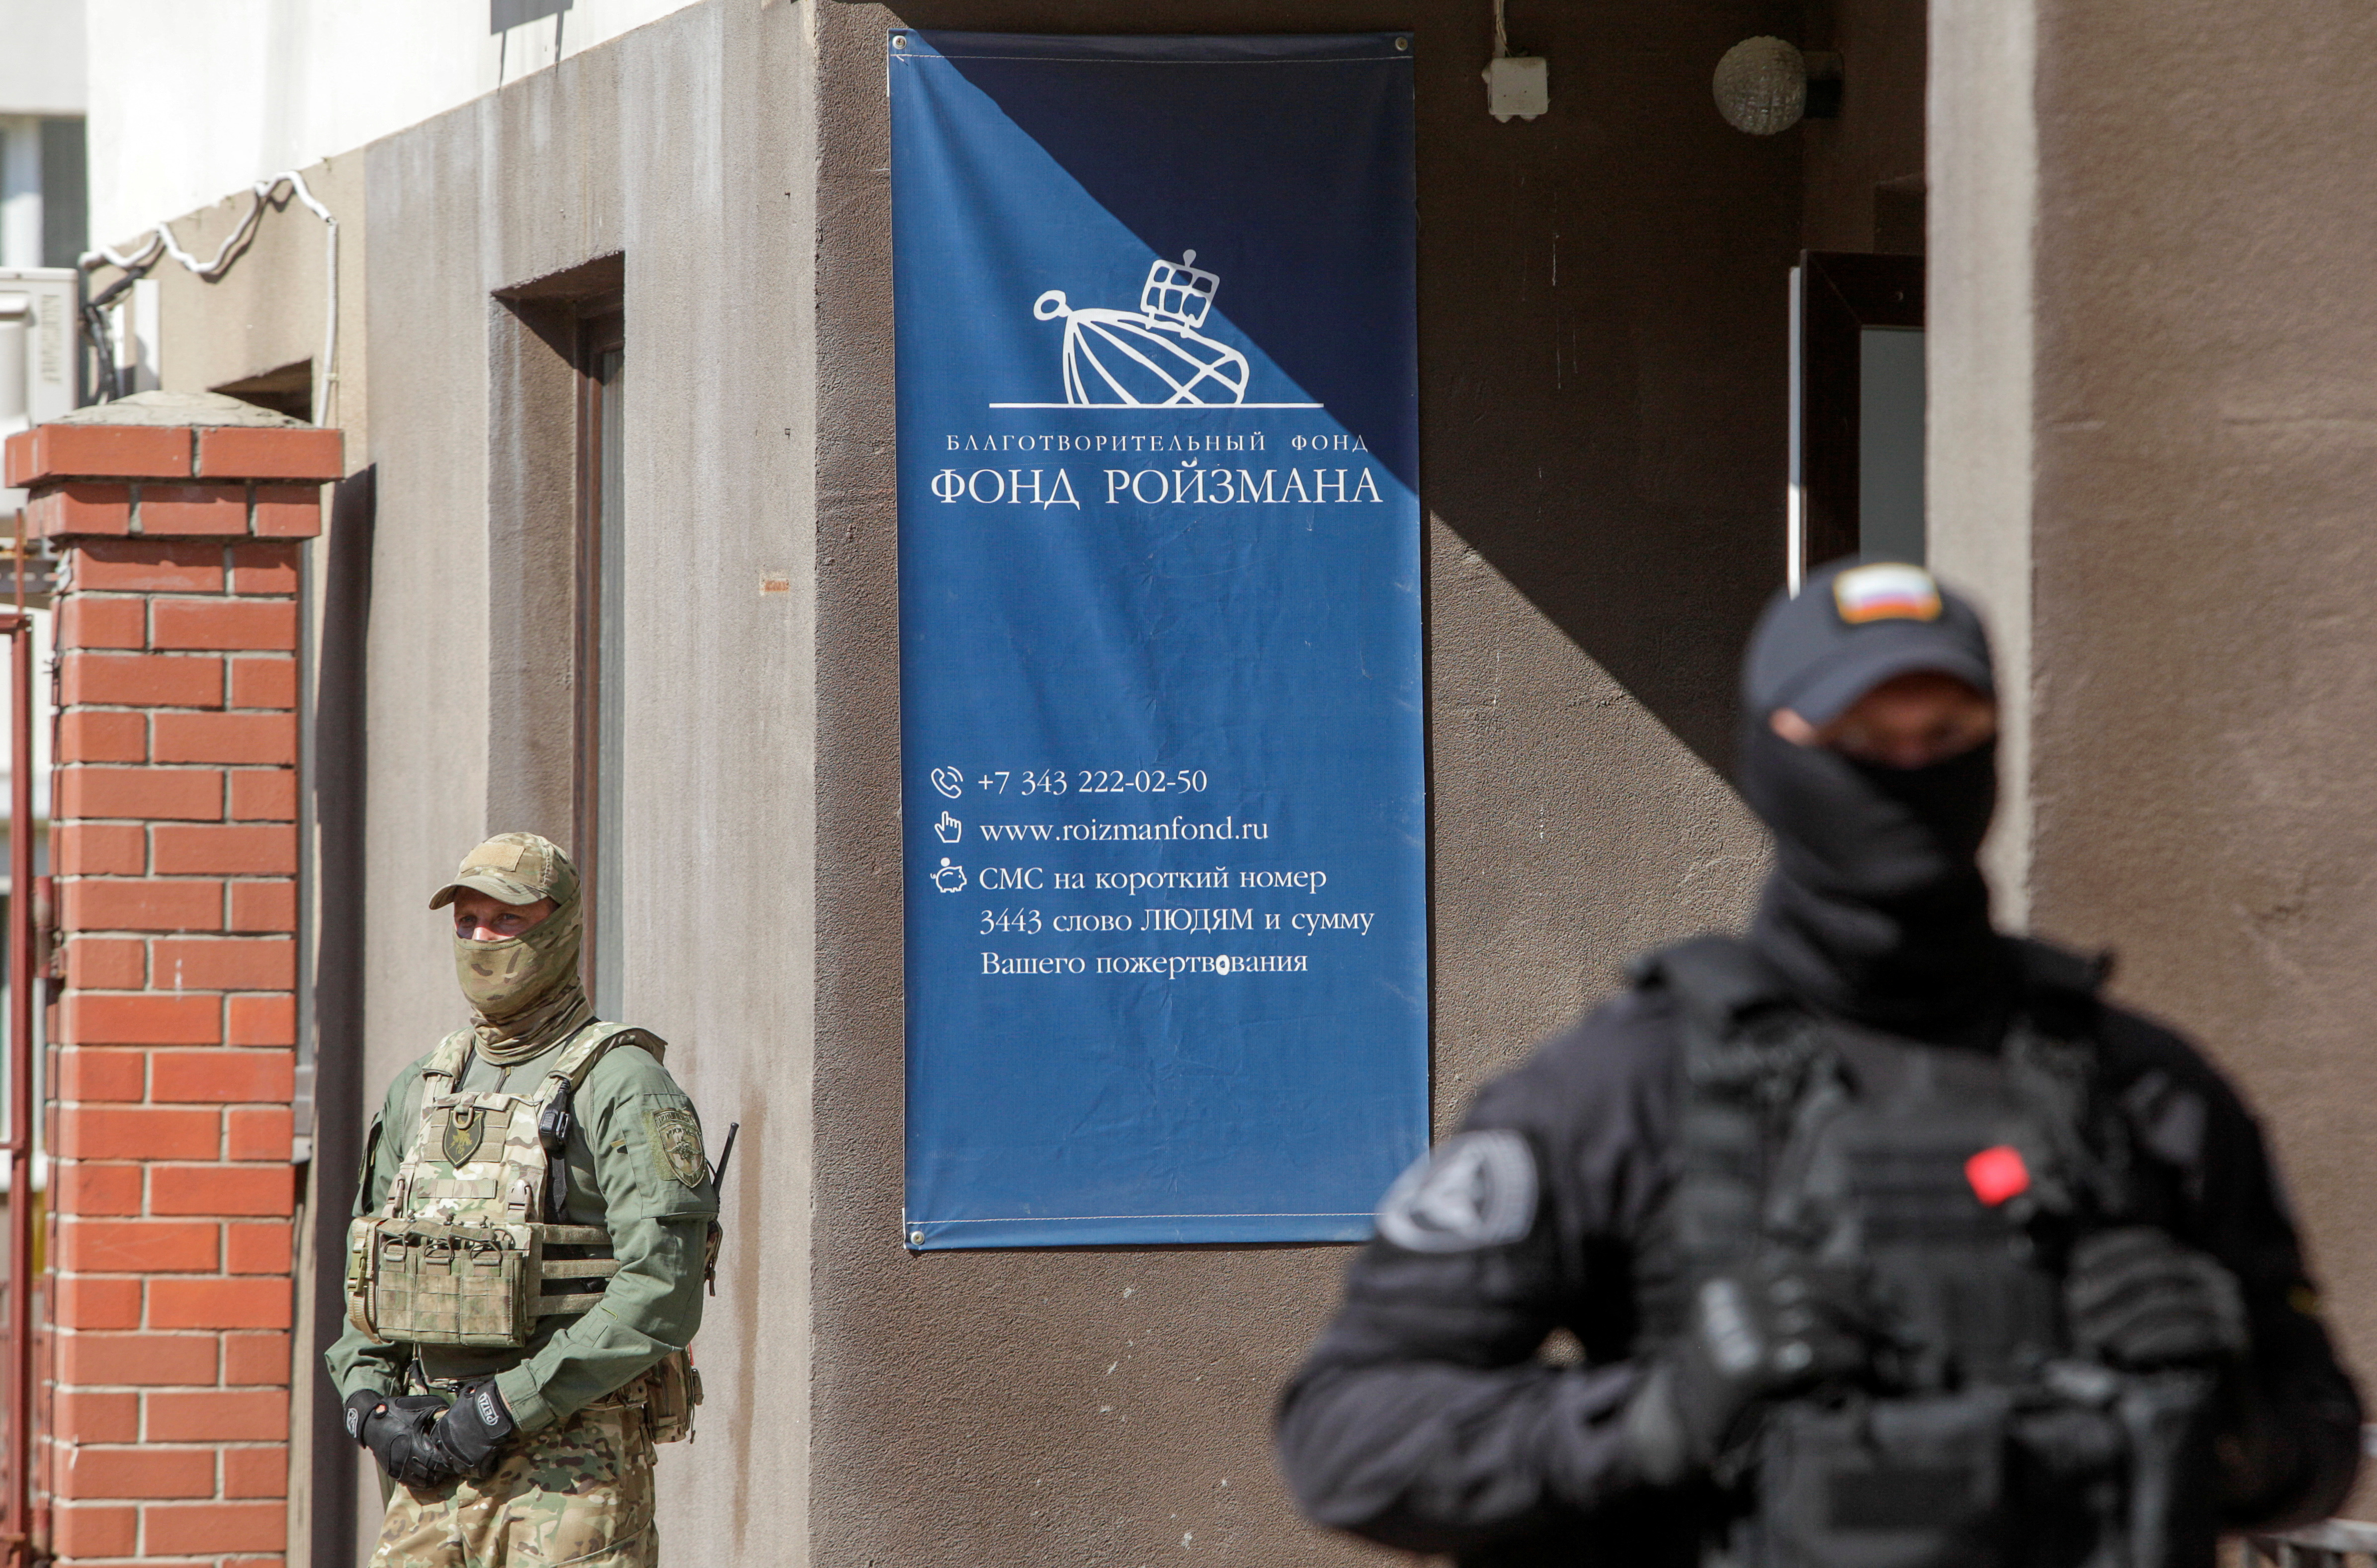 Officers stand guard outside the office of Yevgeny Roizman's charity fund in Yekaterinburg